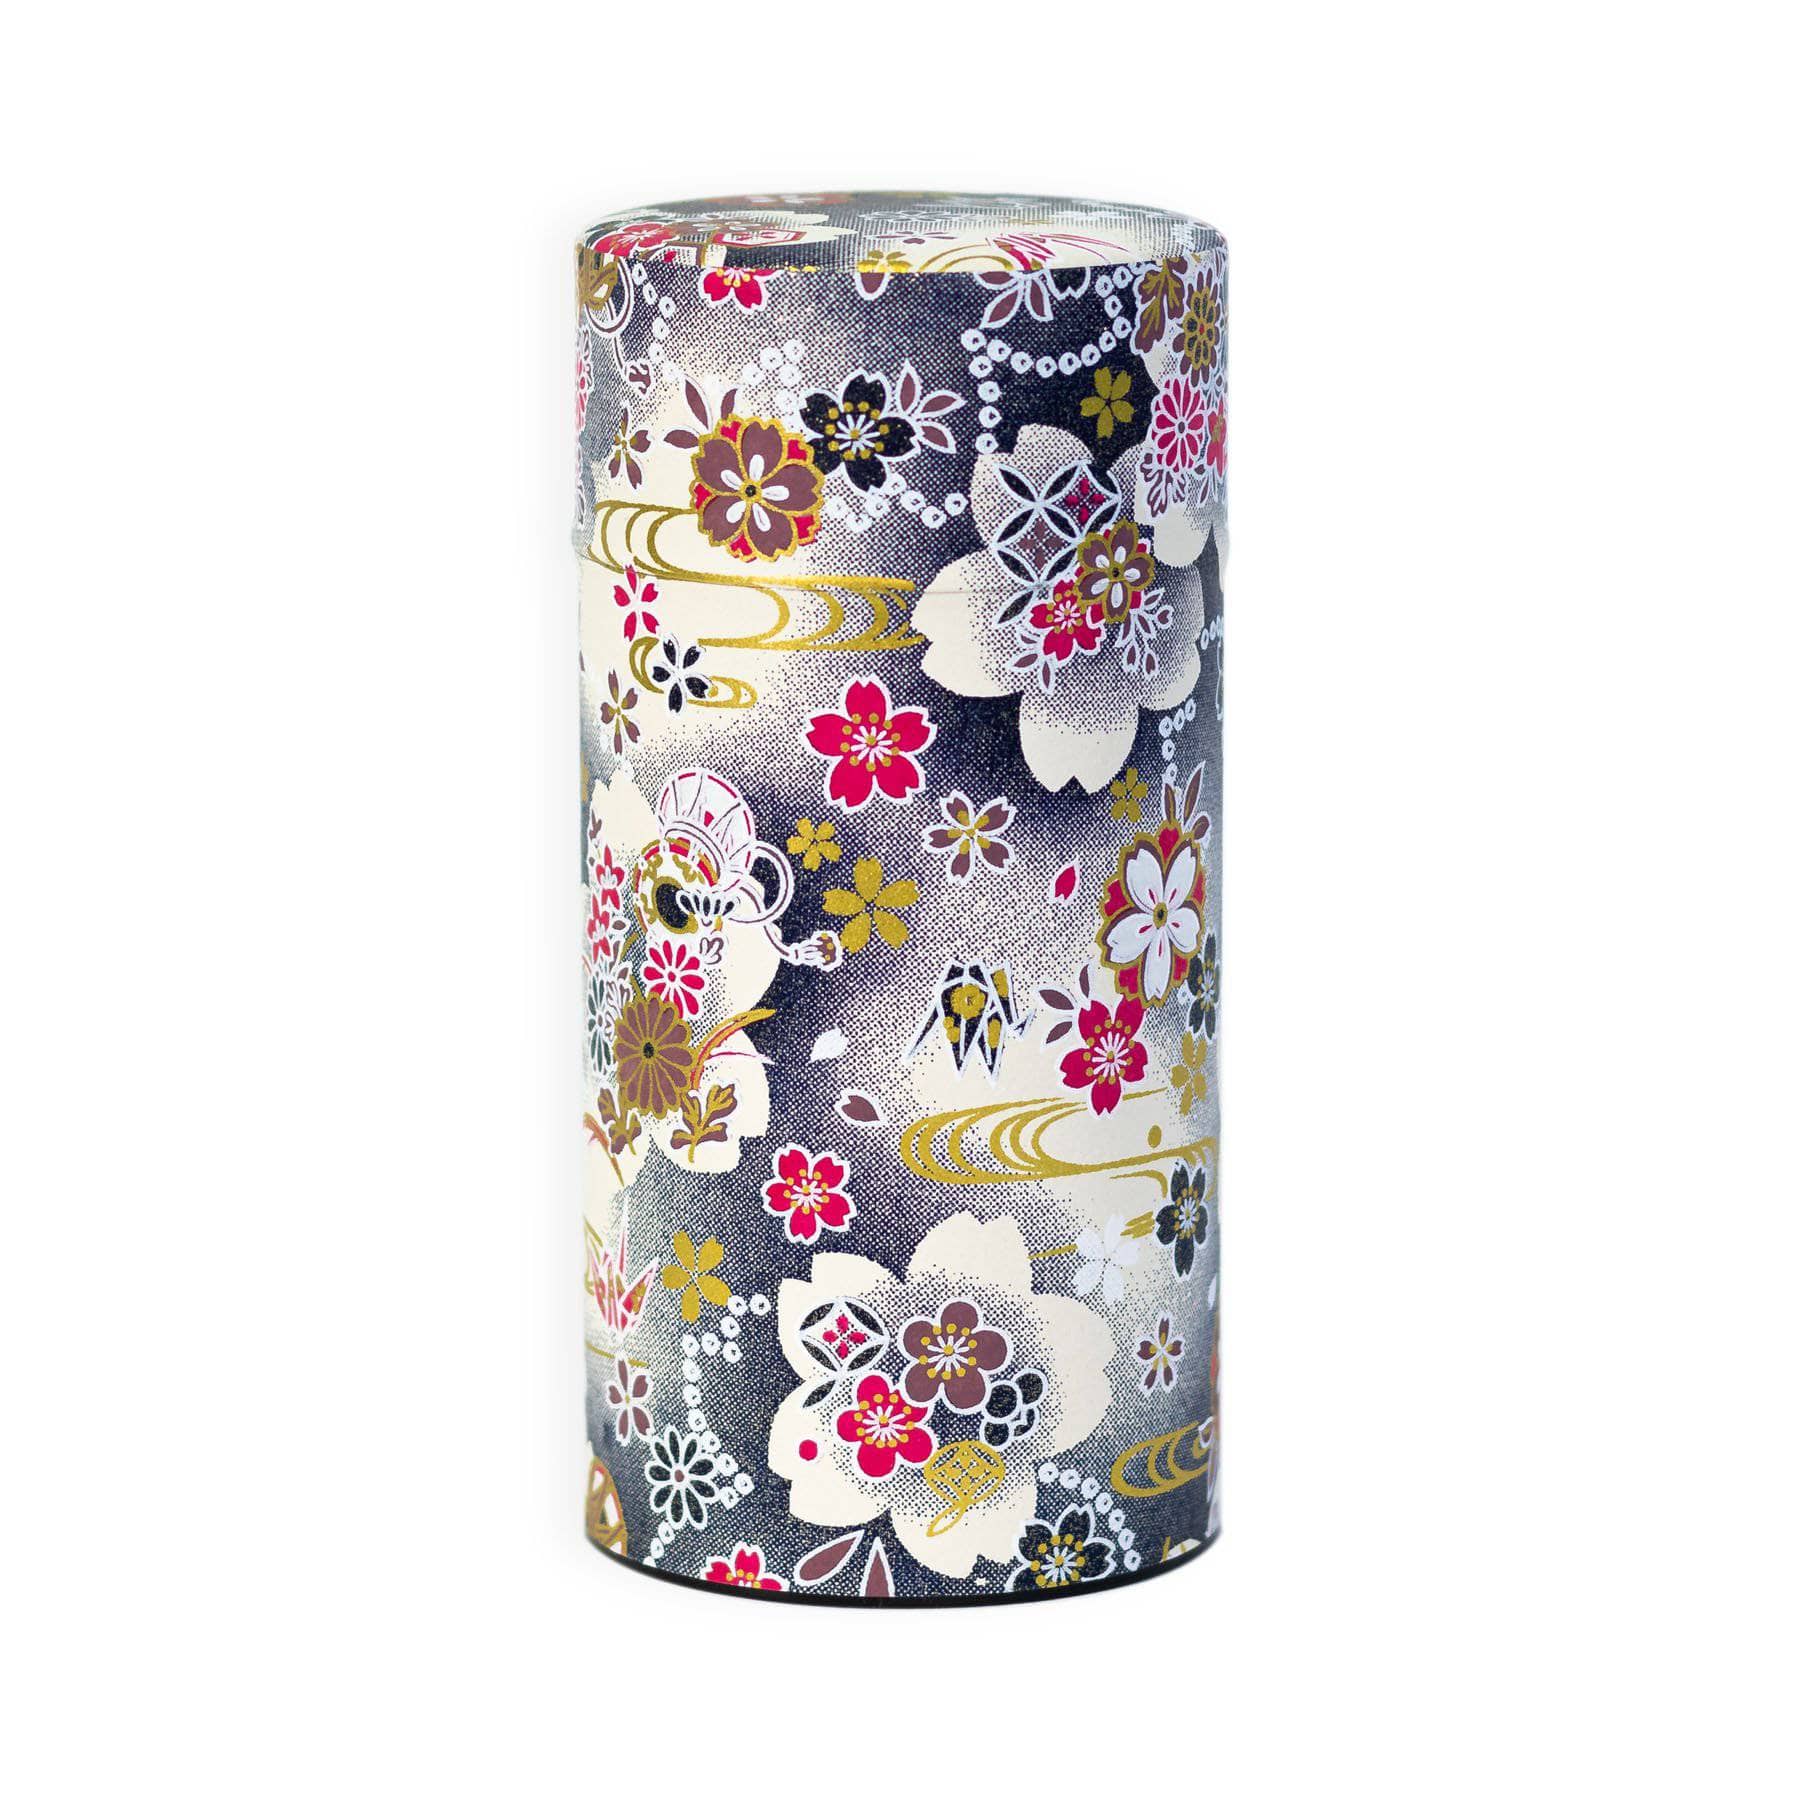 Tea Canister - Japanese Floral  -  Accessories  -  Full Leaf Tea Company